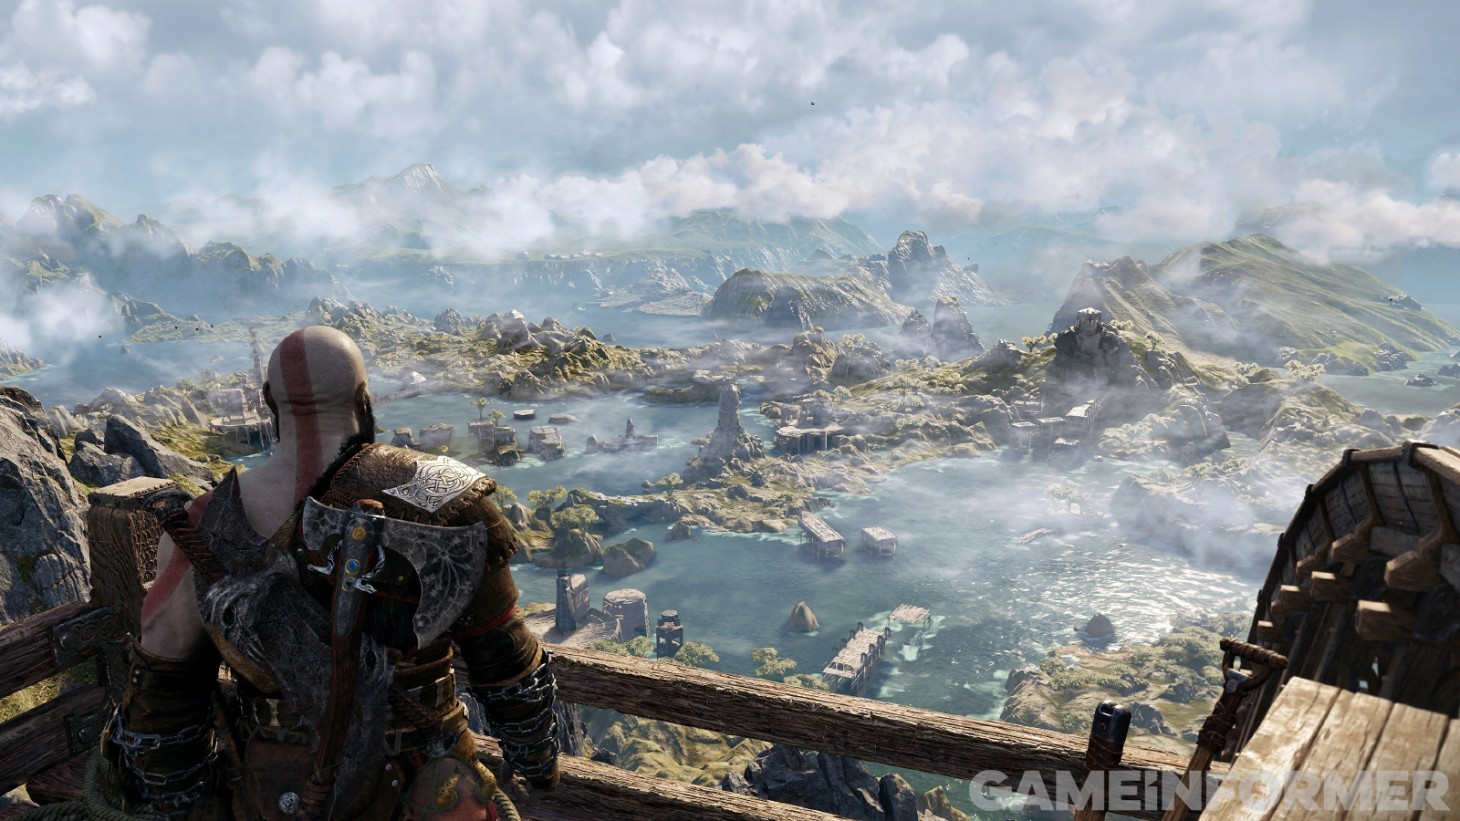 God of War Ragnarok Across the Realms locations: Where to find